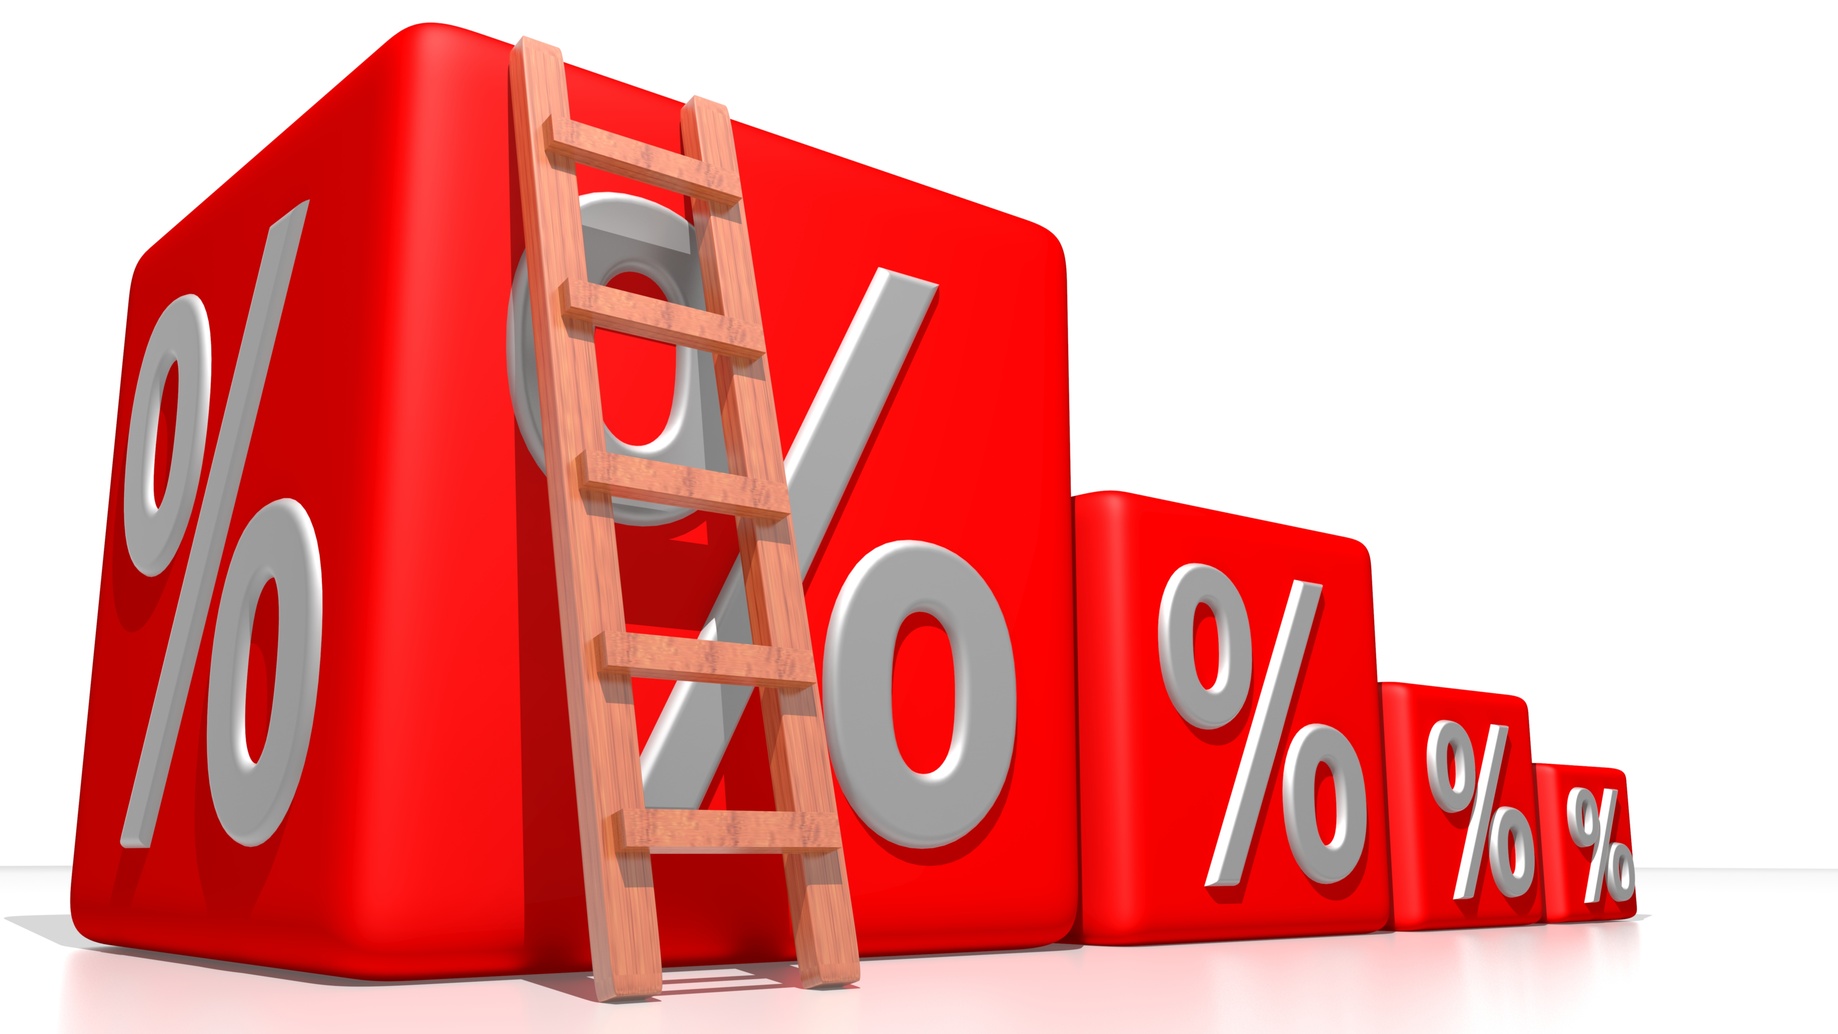 Repo rate hiked by 50 bp to 6.75%